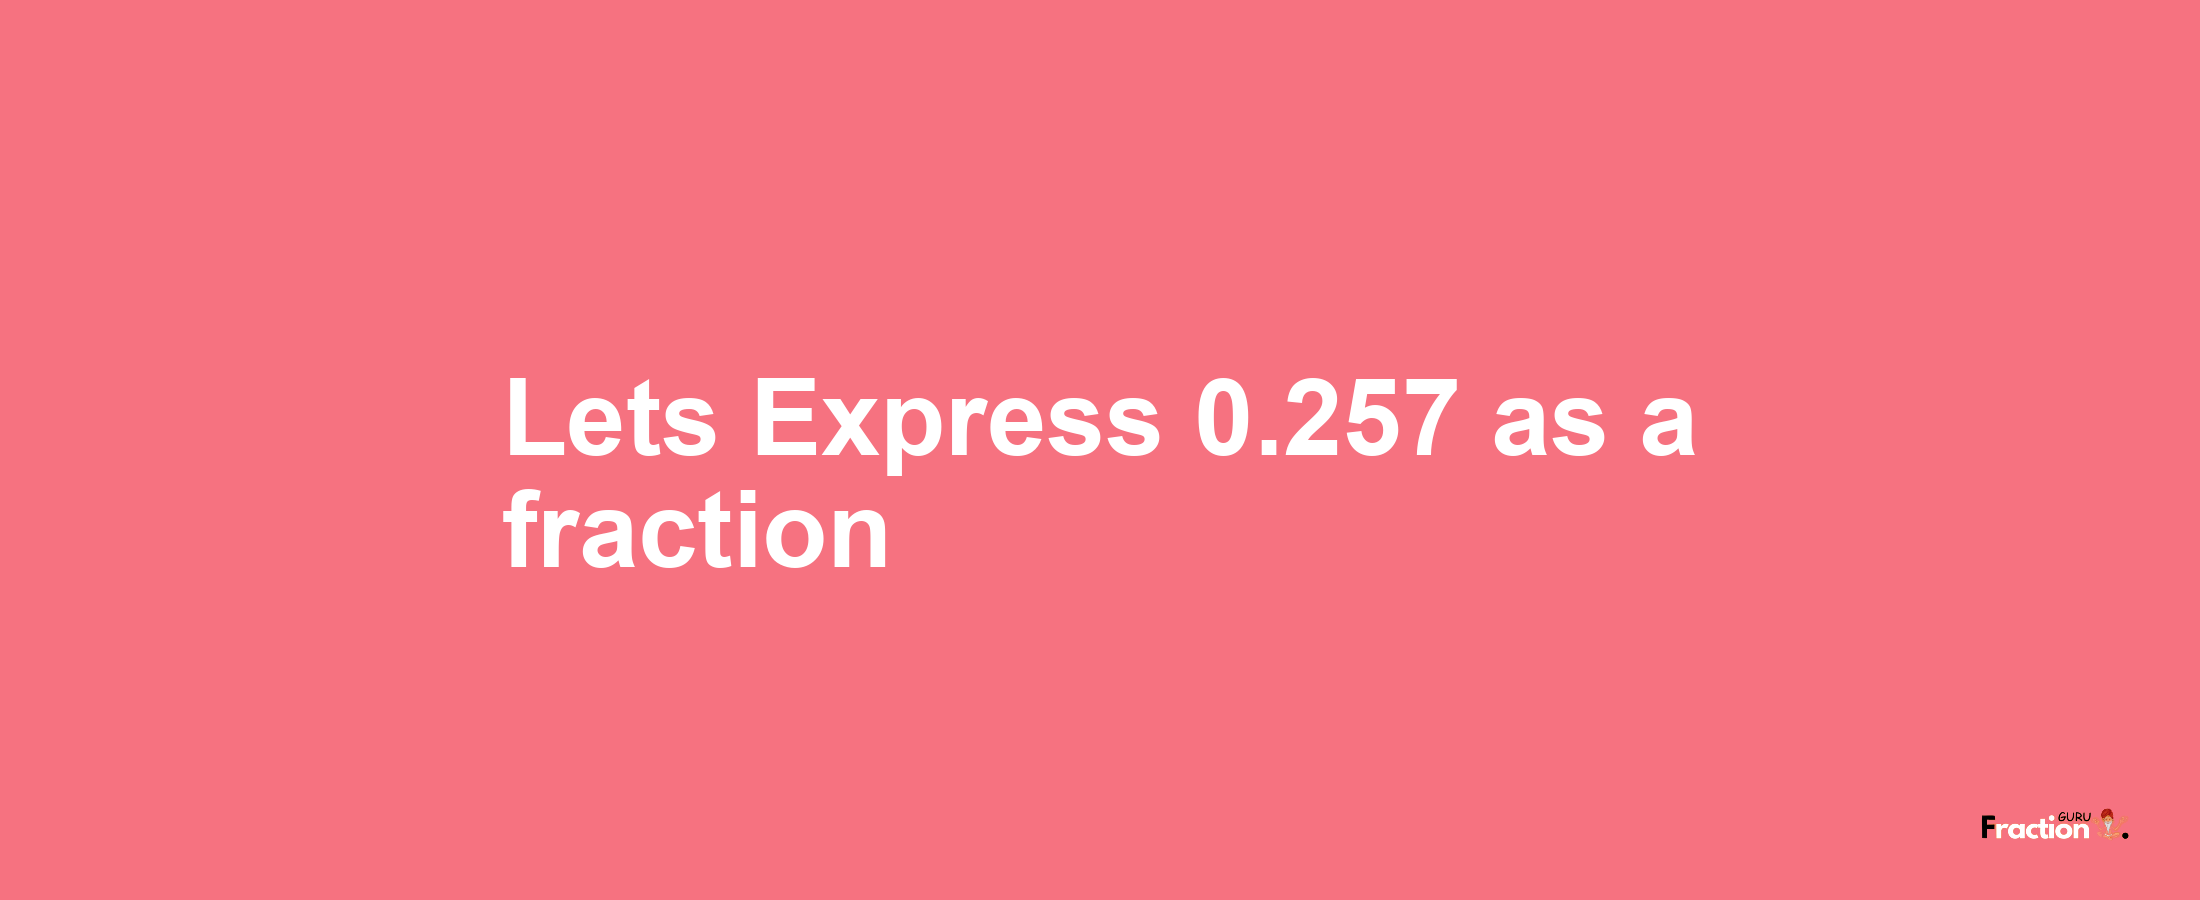 Lets Express 0.257 as afraction